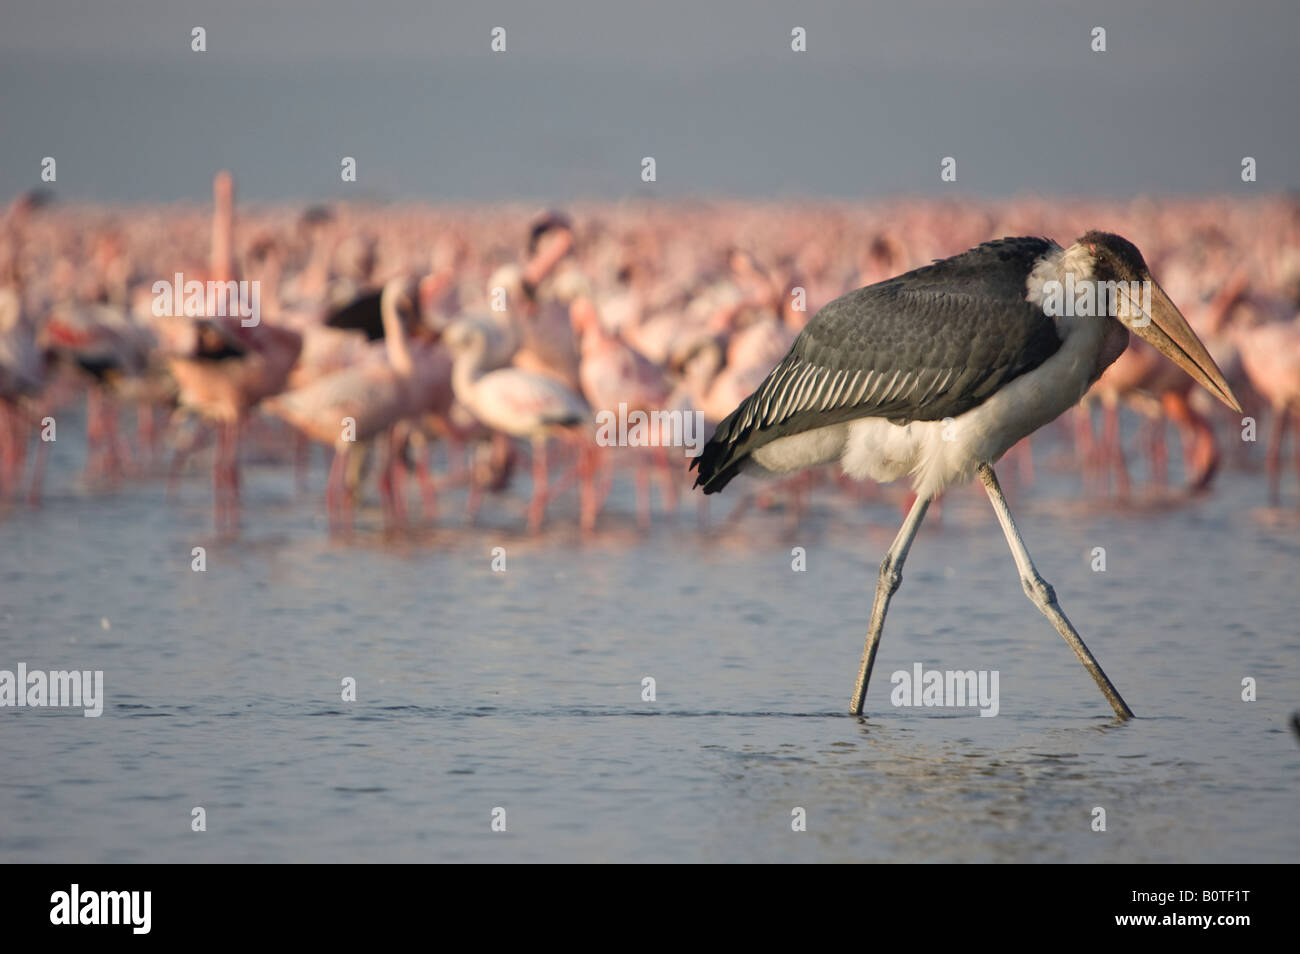 A maribou stork walking in shallow waters Stock Photo